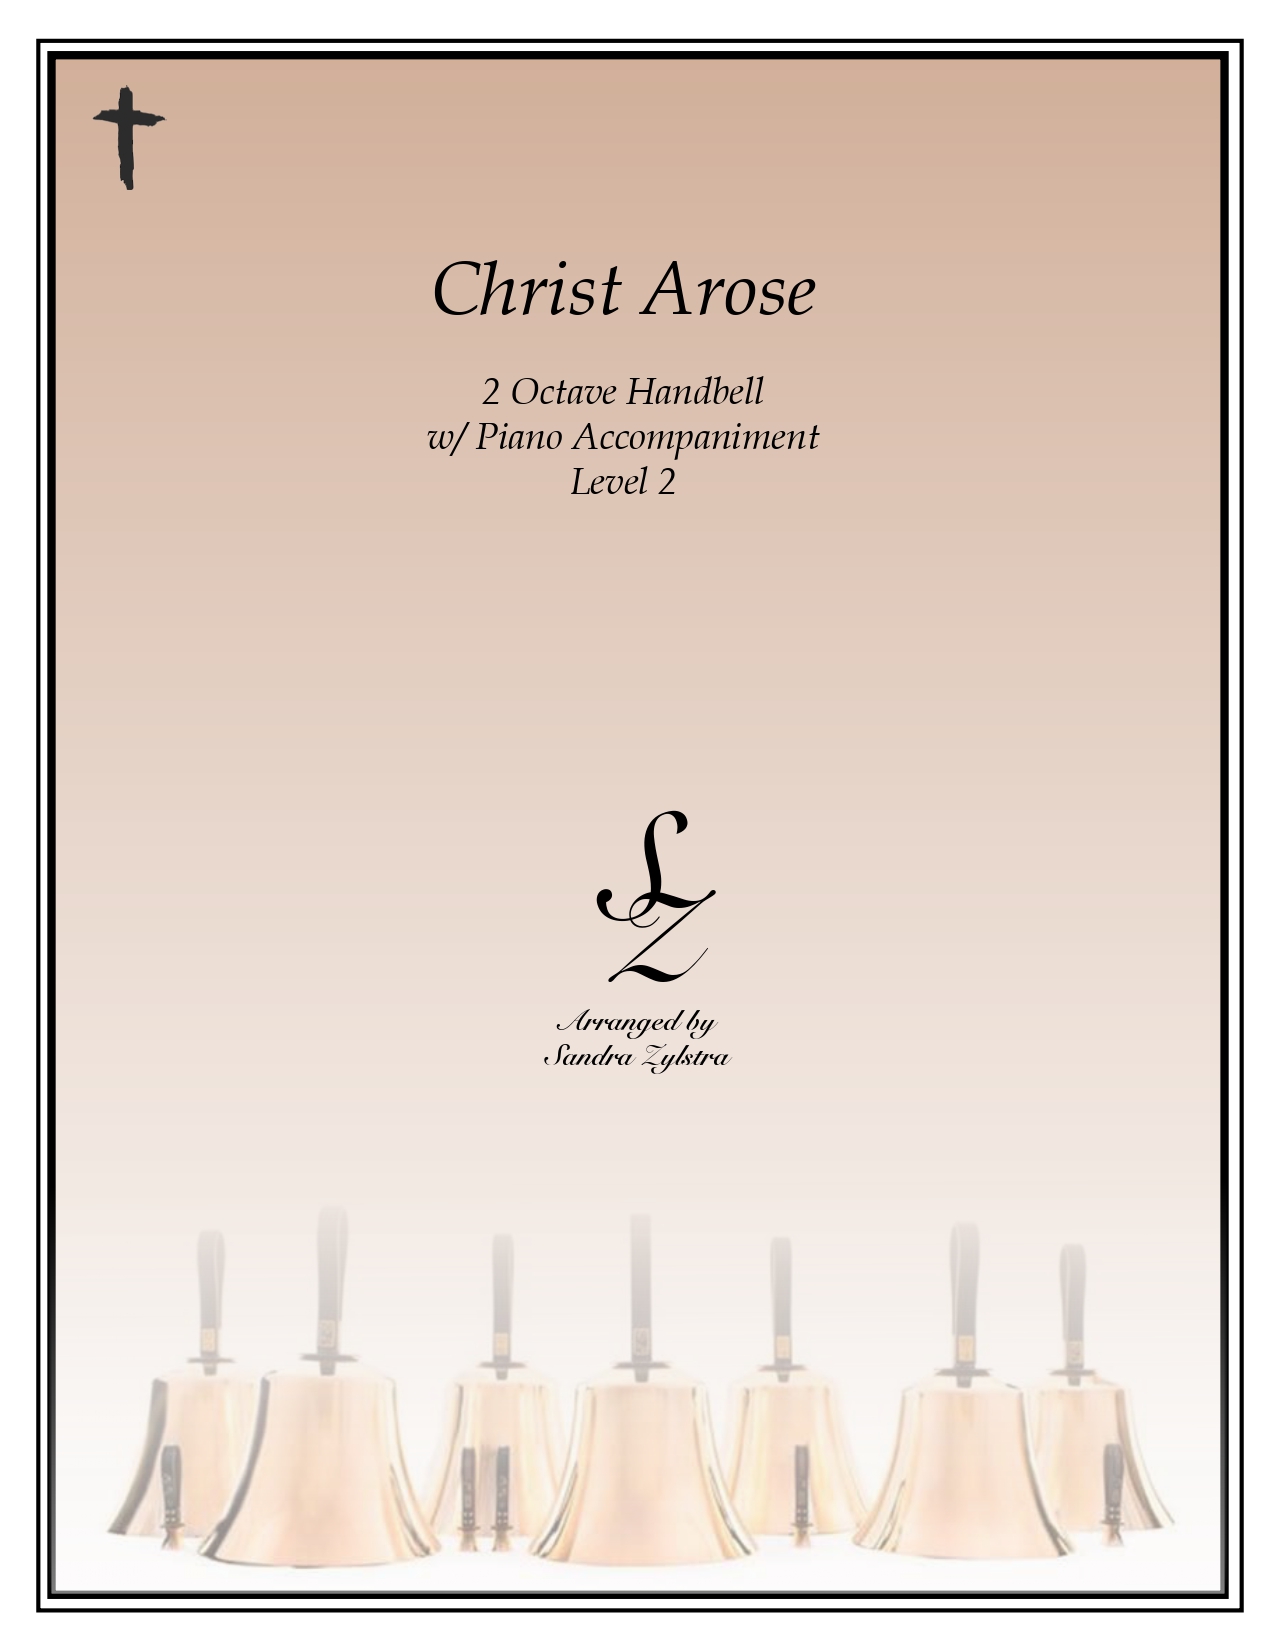 Christ Arose 2 octave handbell piano part cover page 00011